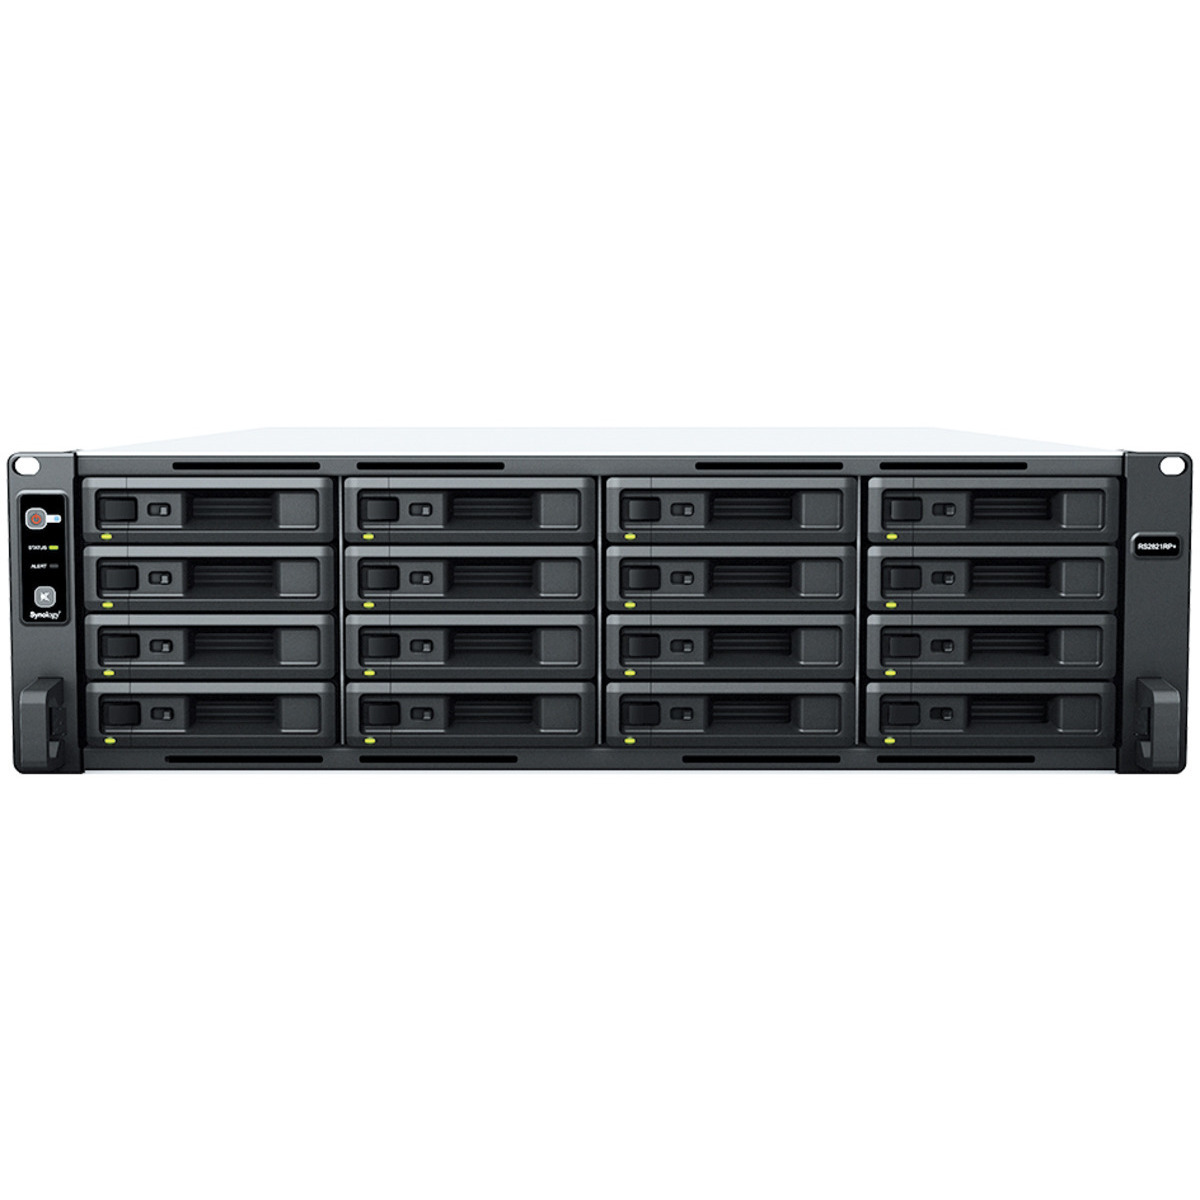 buy $8228 Synology RackStation RS2821RP+ 128tb RackMount NAS - Network Attached Storage Device 16x8000gb Seagate EXOS ST8000NM000A 3.5 7200rpm SATA 6Gb/s HDD ENTERPRISE Class Drives Installed - Burn-In Tested - nas headquarters buy network attached storage server device das new raid-5 free shipping usa christmas new year holiday sale RackStation RS2821RP+